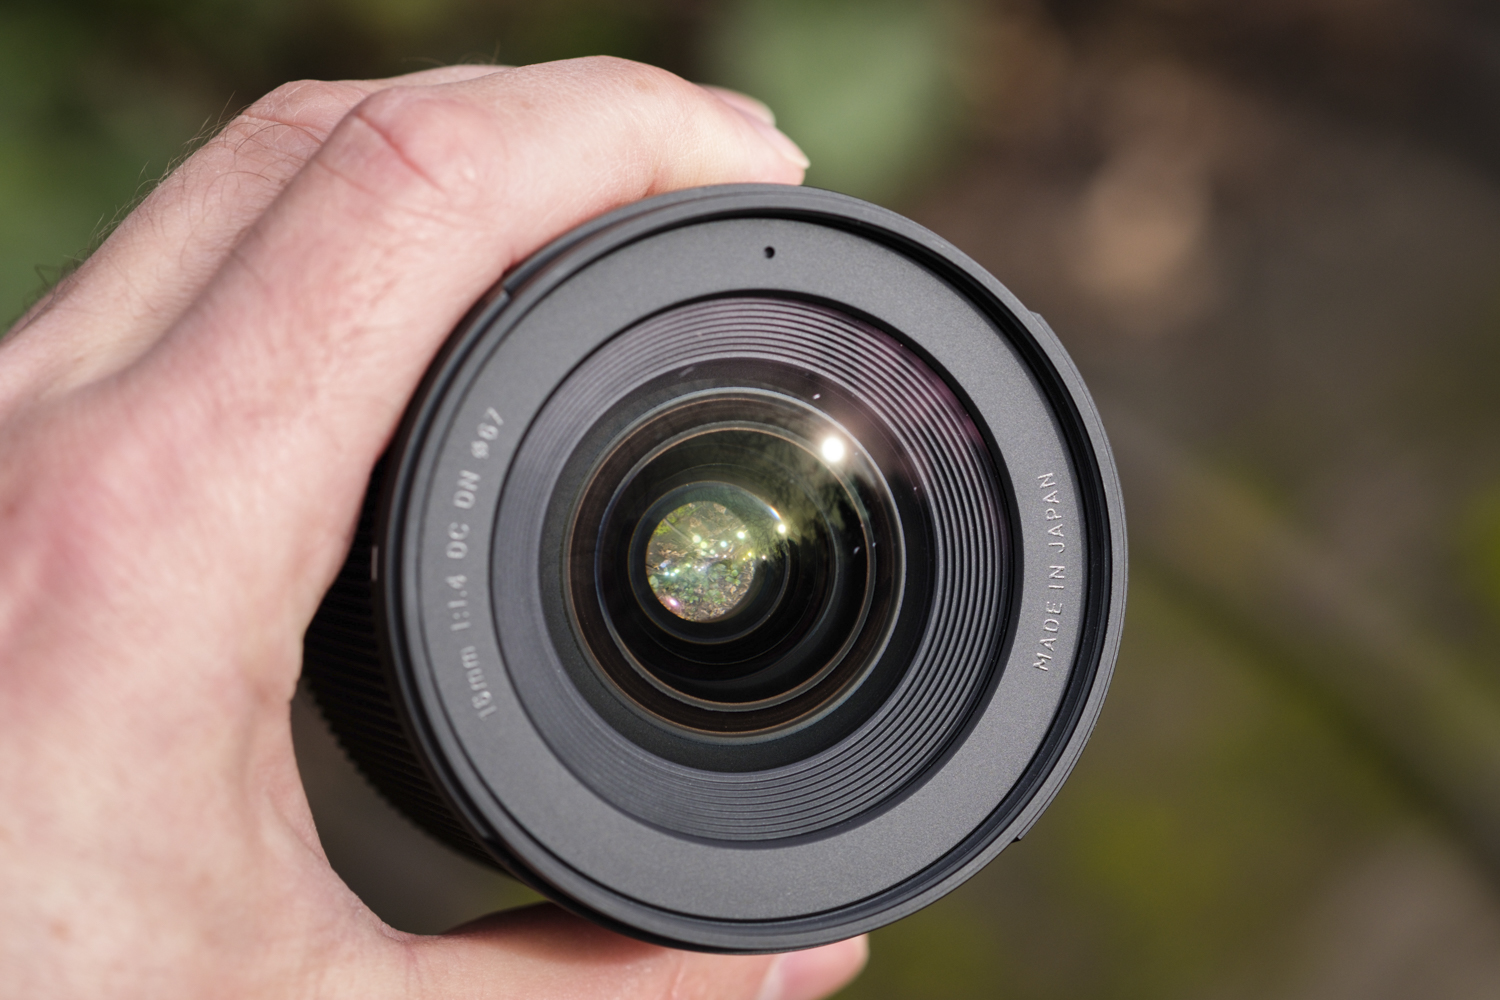 Is the Sigma 16mm F1.4 Lens worth the hype?, by Conveyorofrandomness